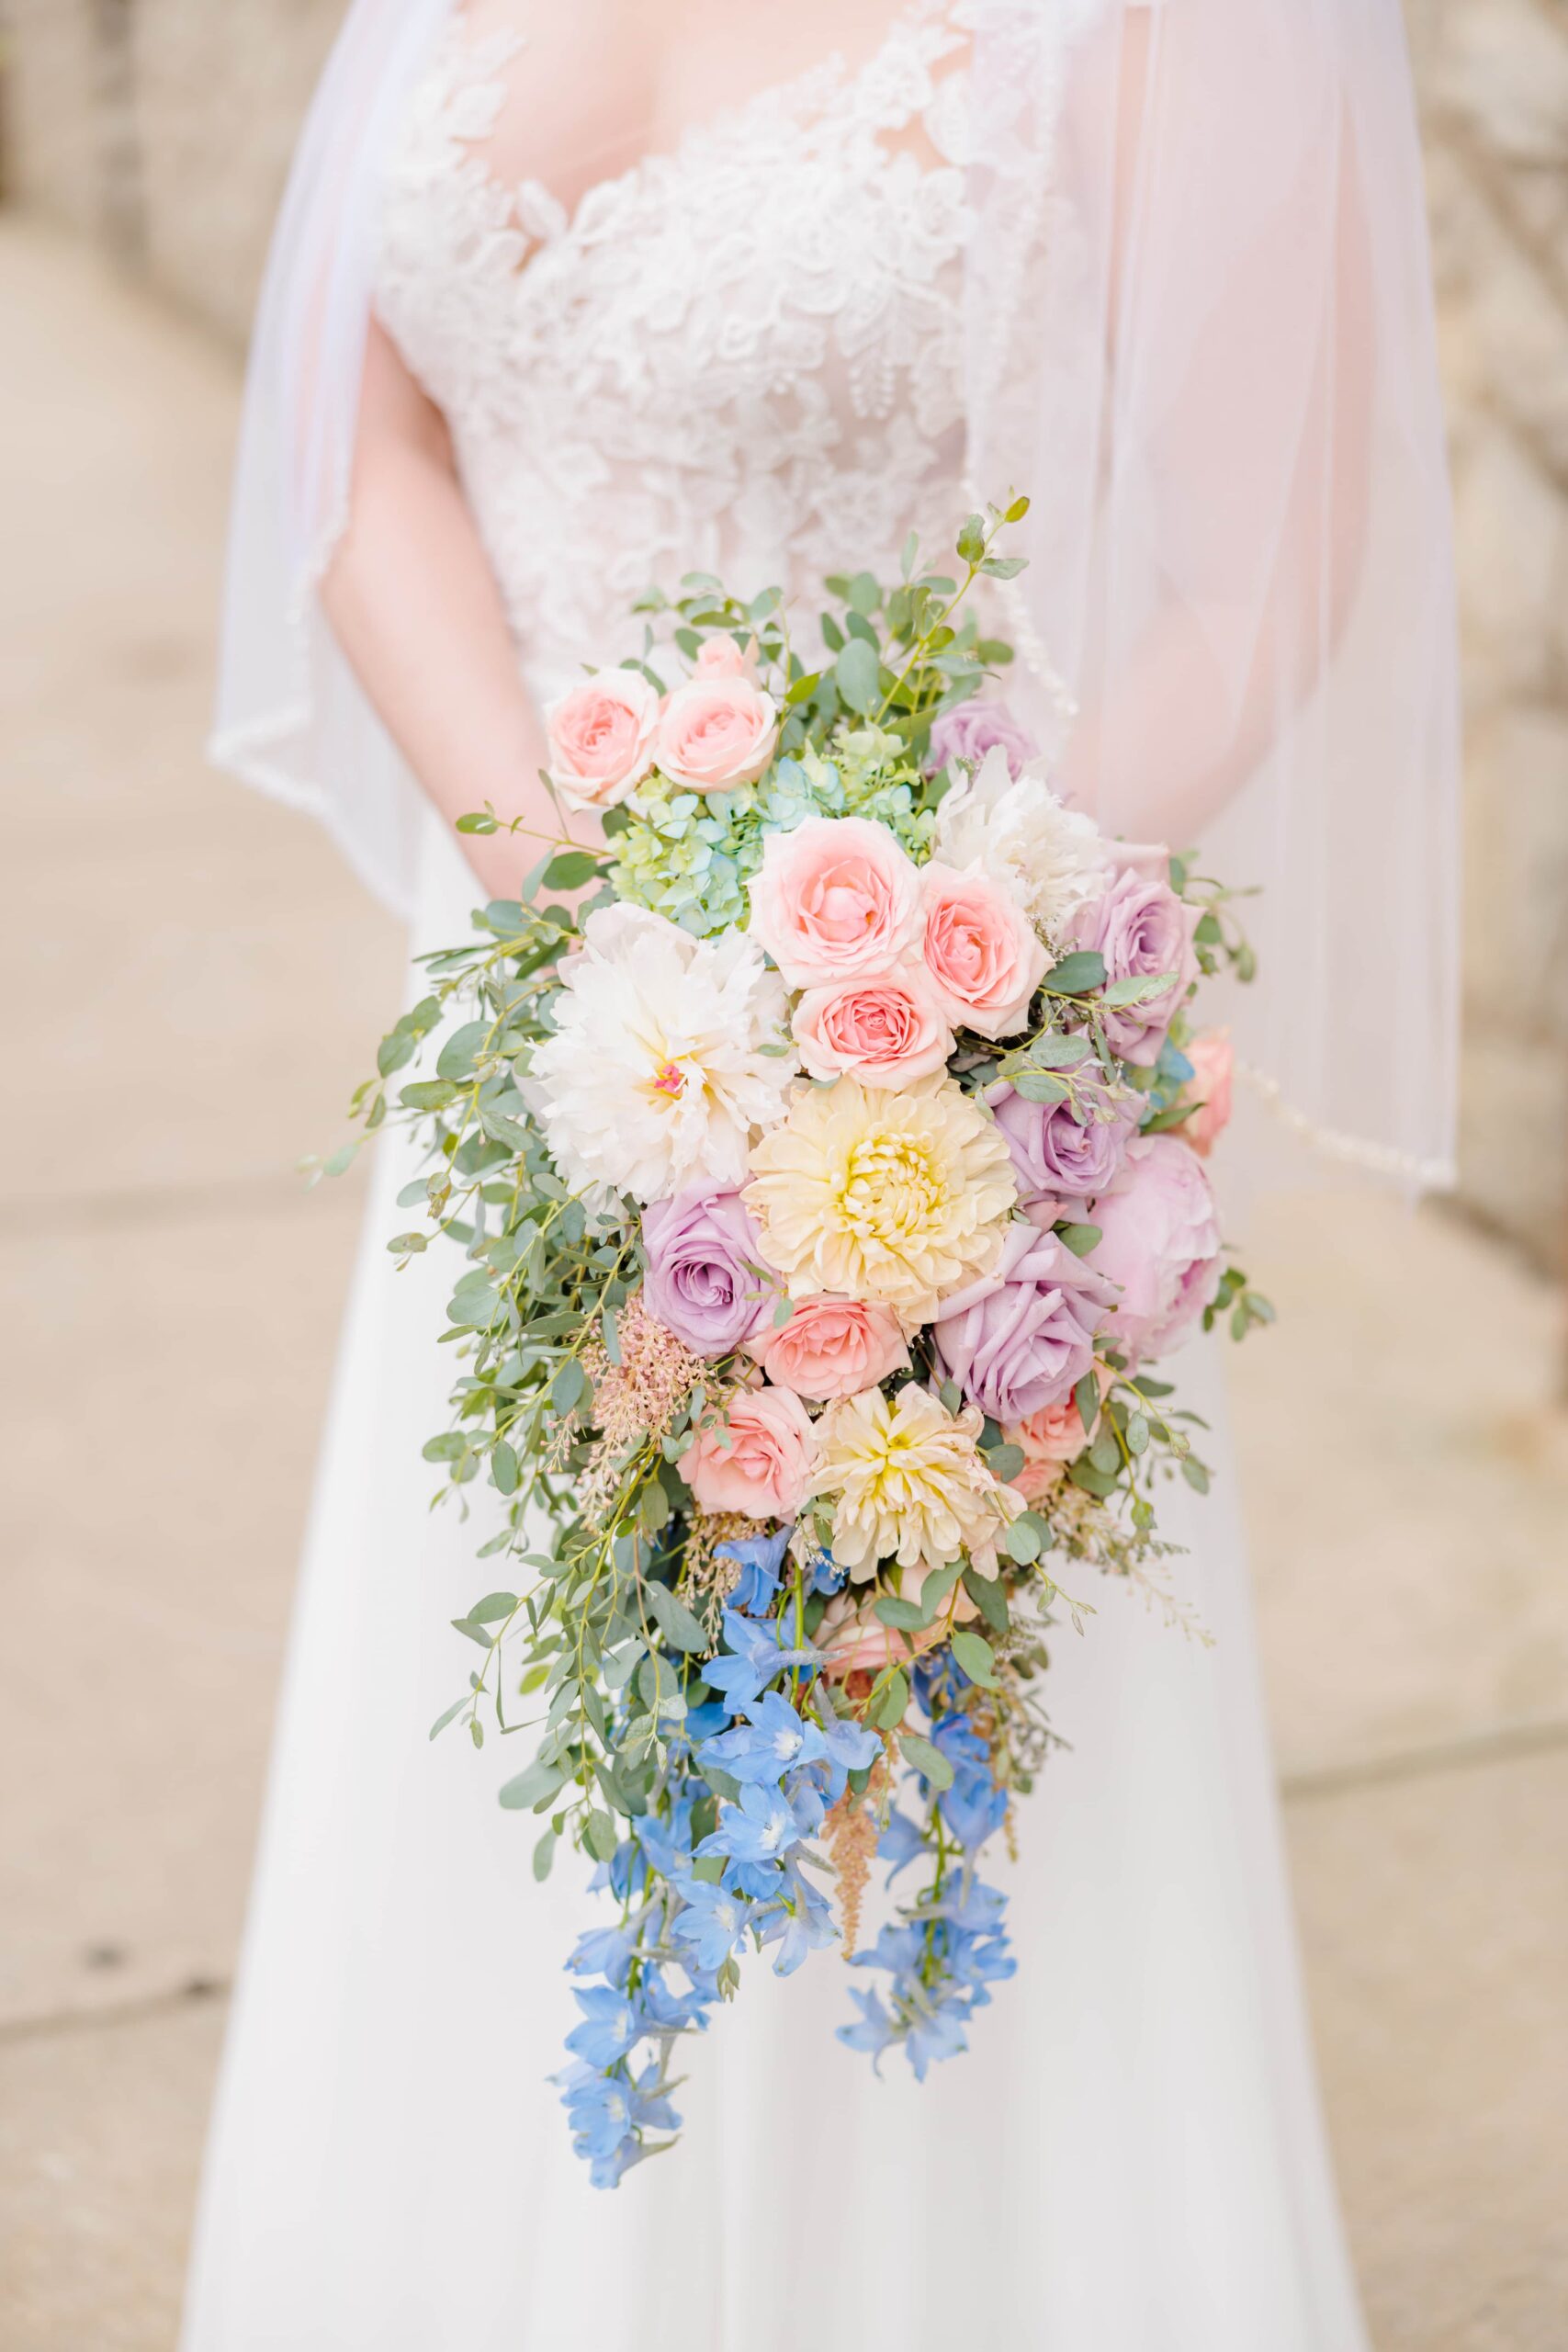 This Greensboro wedding had the bride holding a cascading flower bouquet with lots of pastel colors.